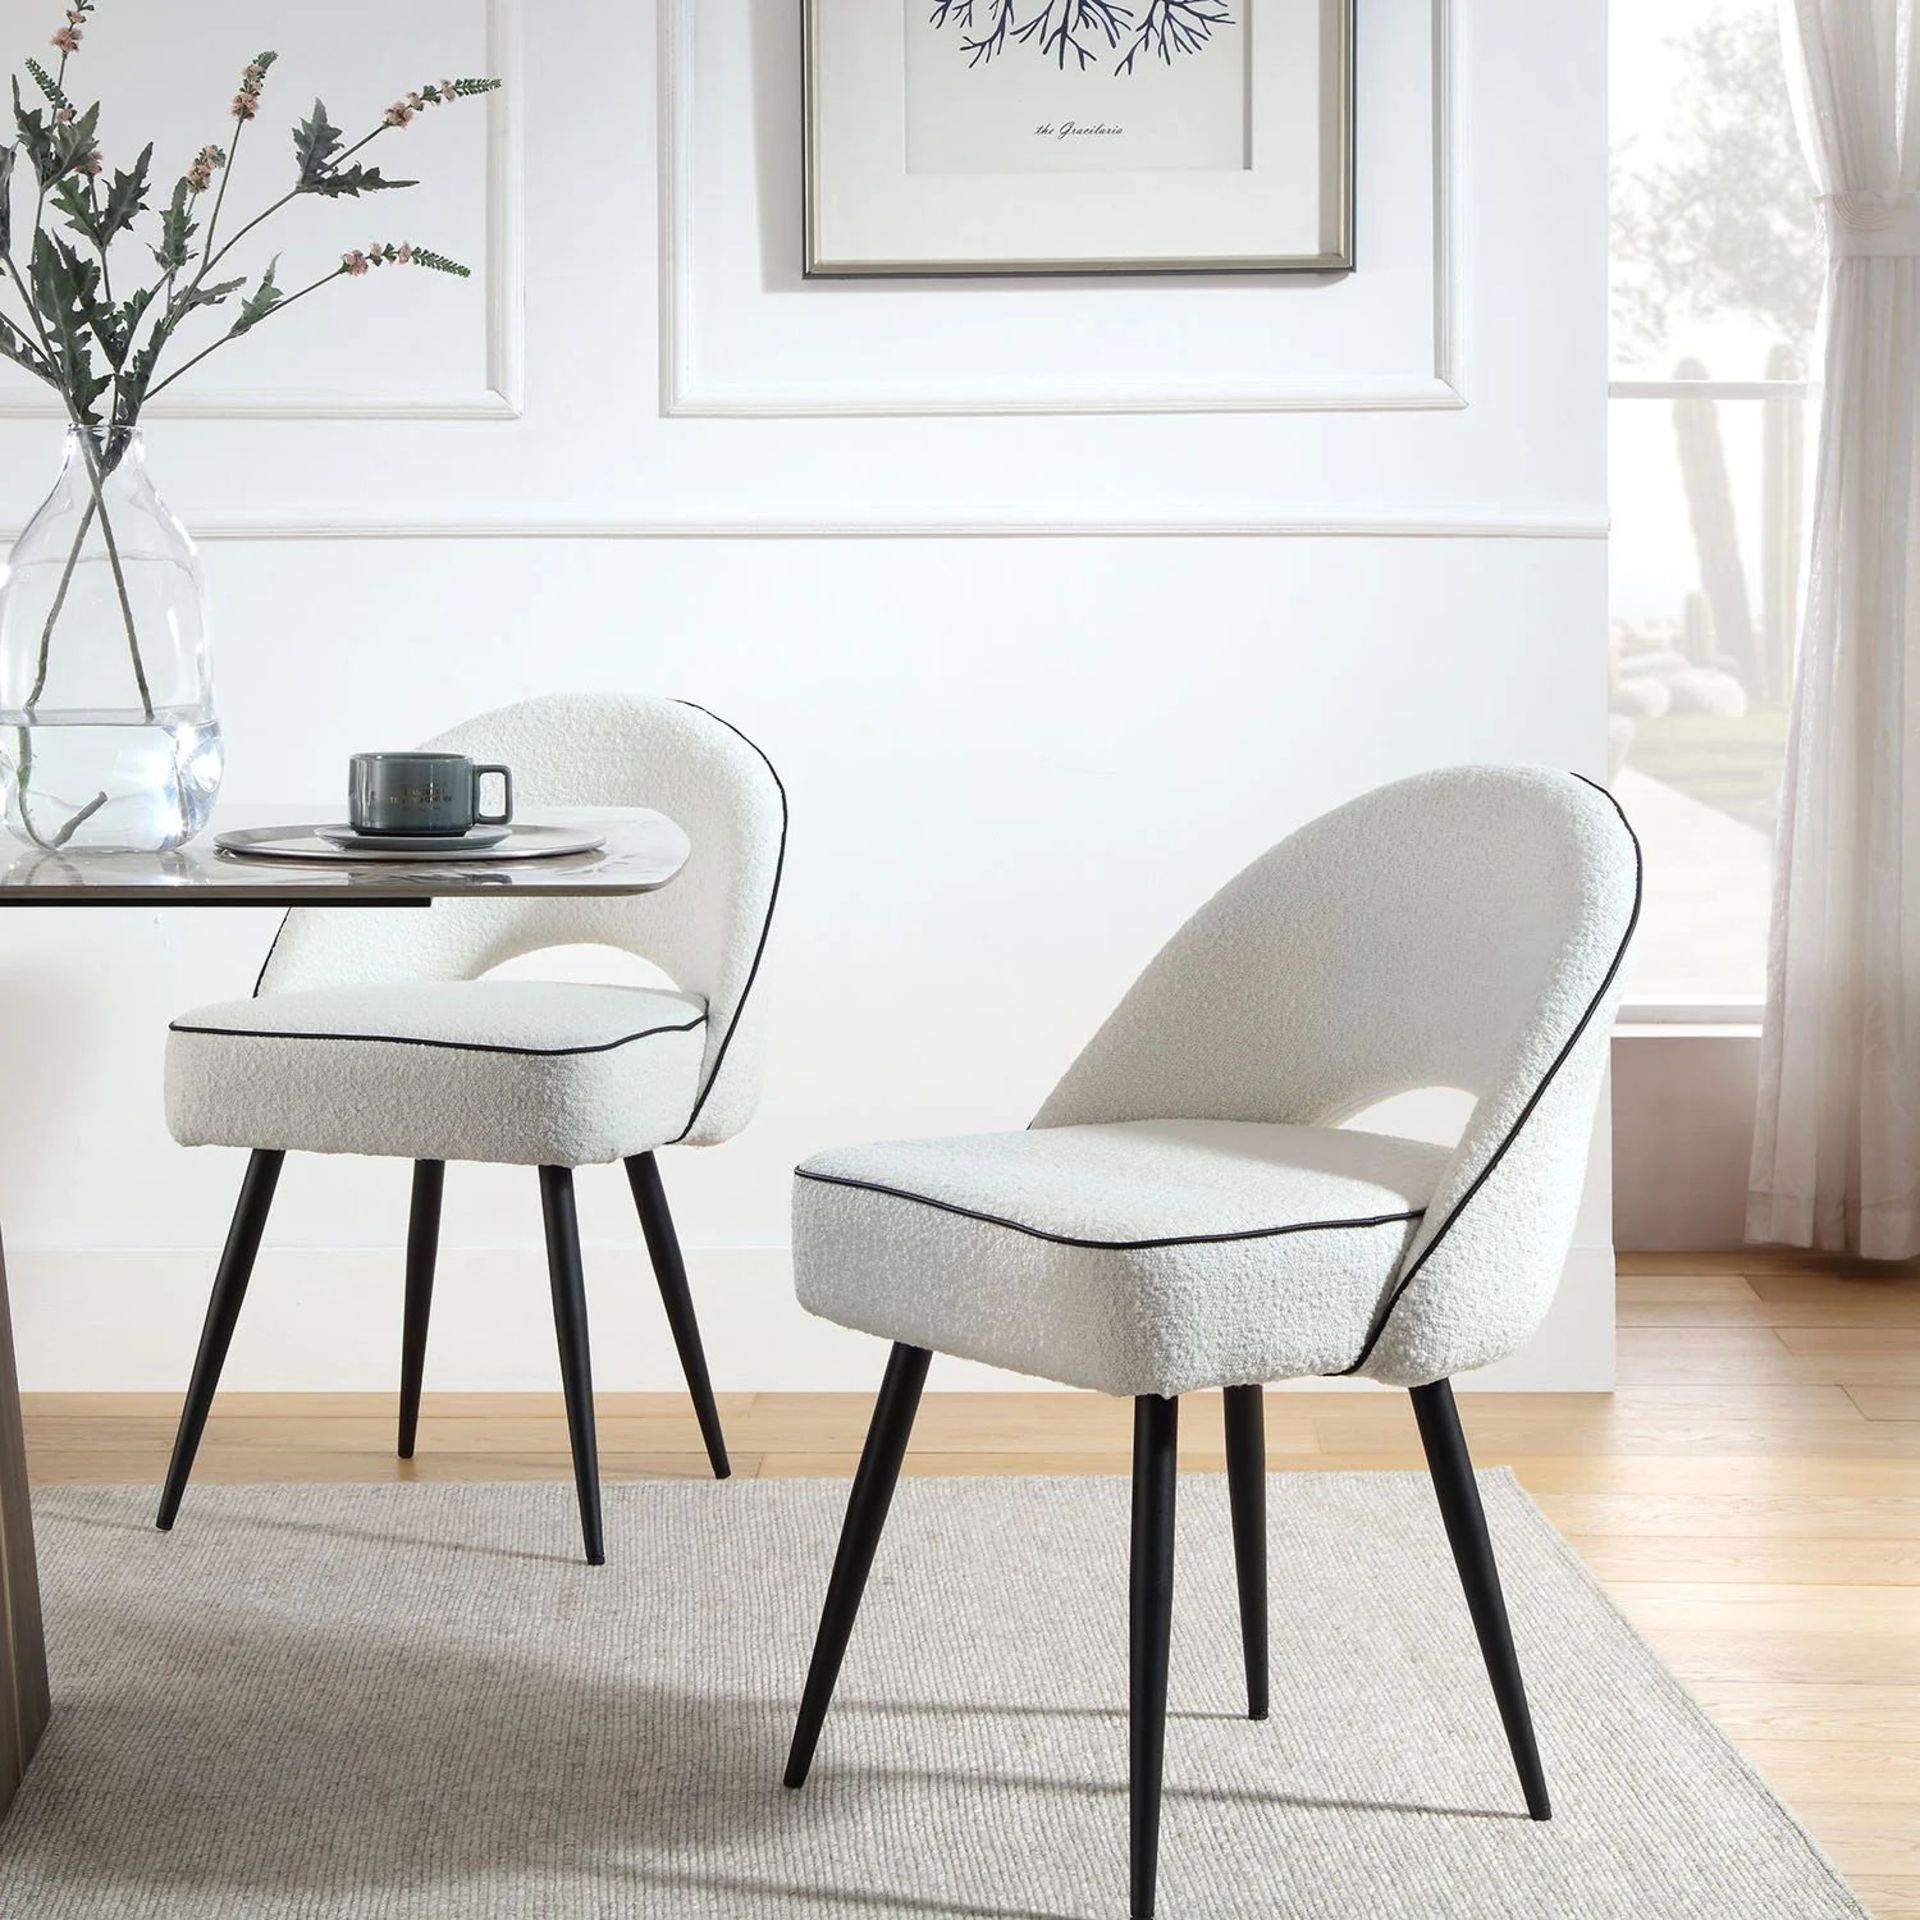 Oakley Set of 2 White Boucle Upholstered Dining Chairs with Piping. - R14. RRP £269.99. Our